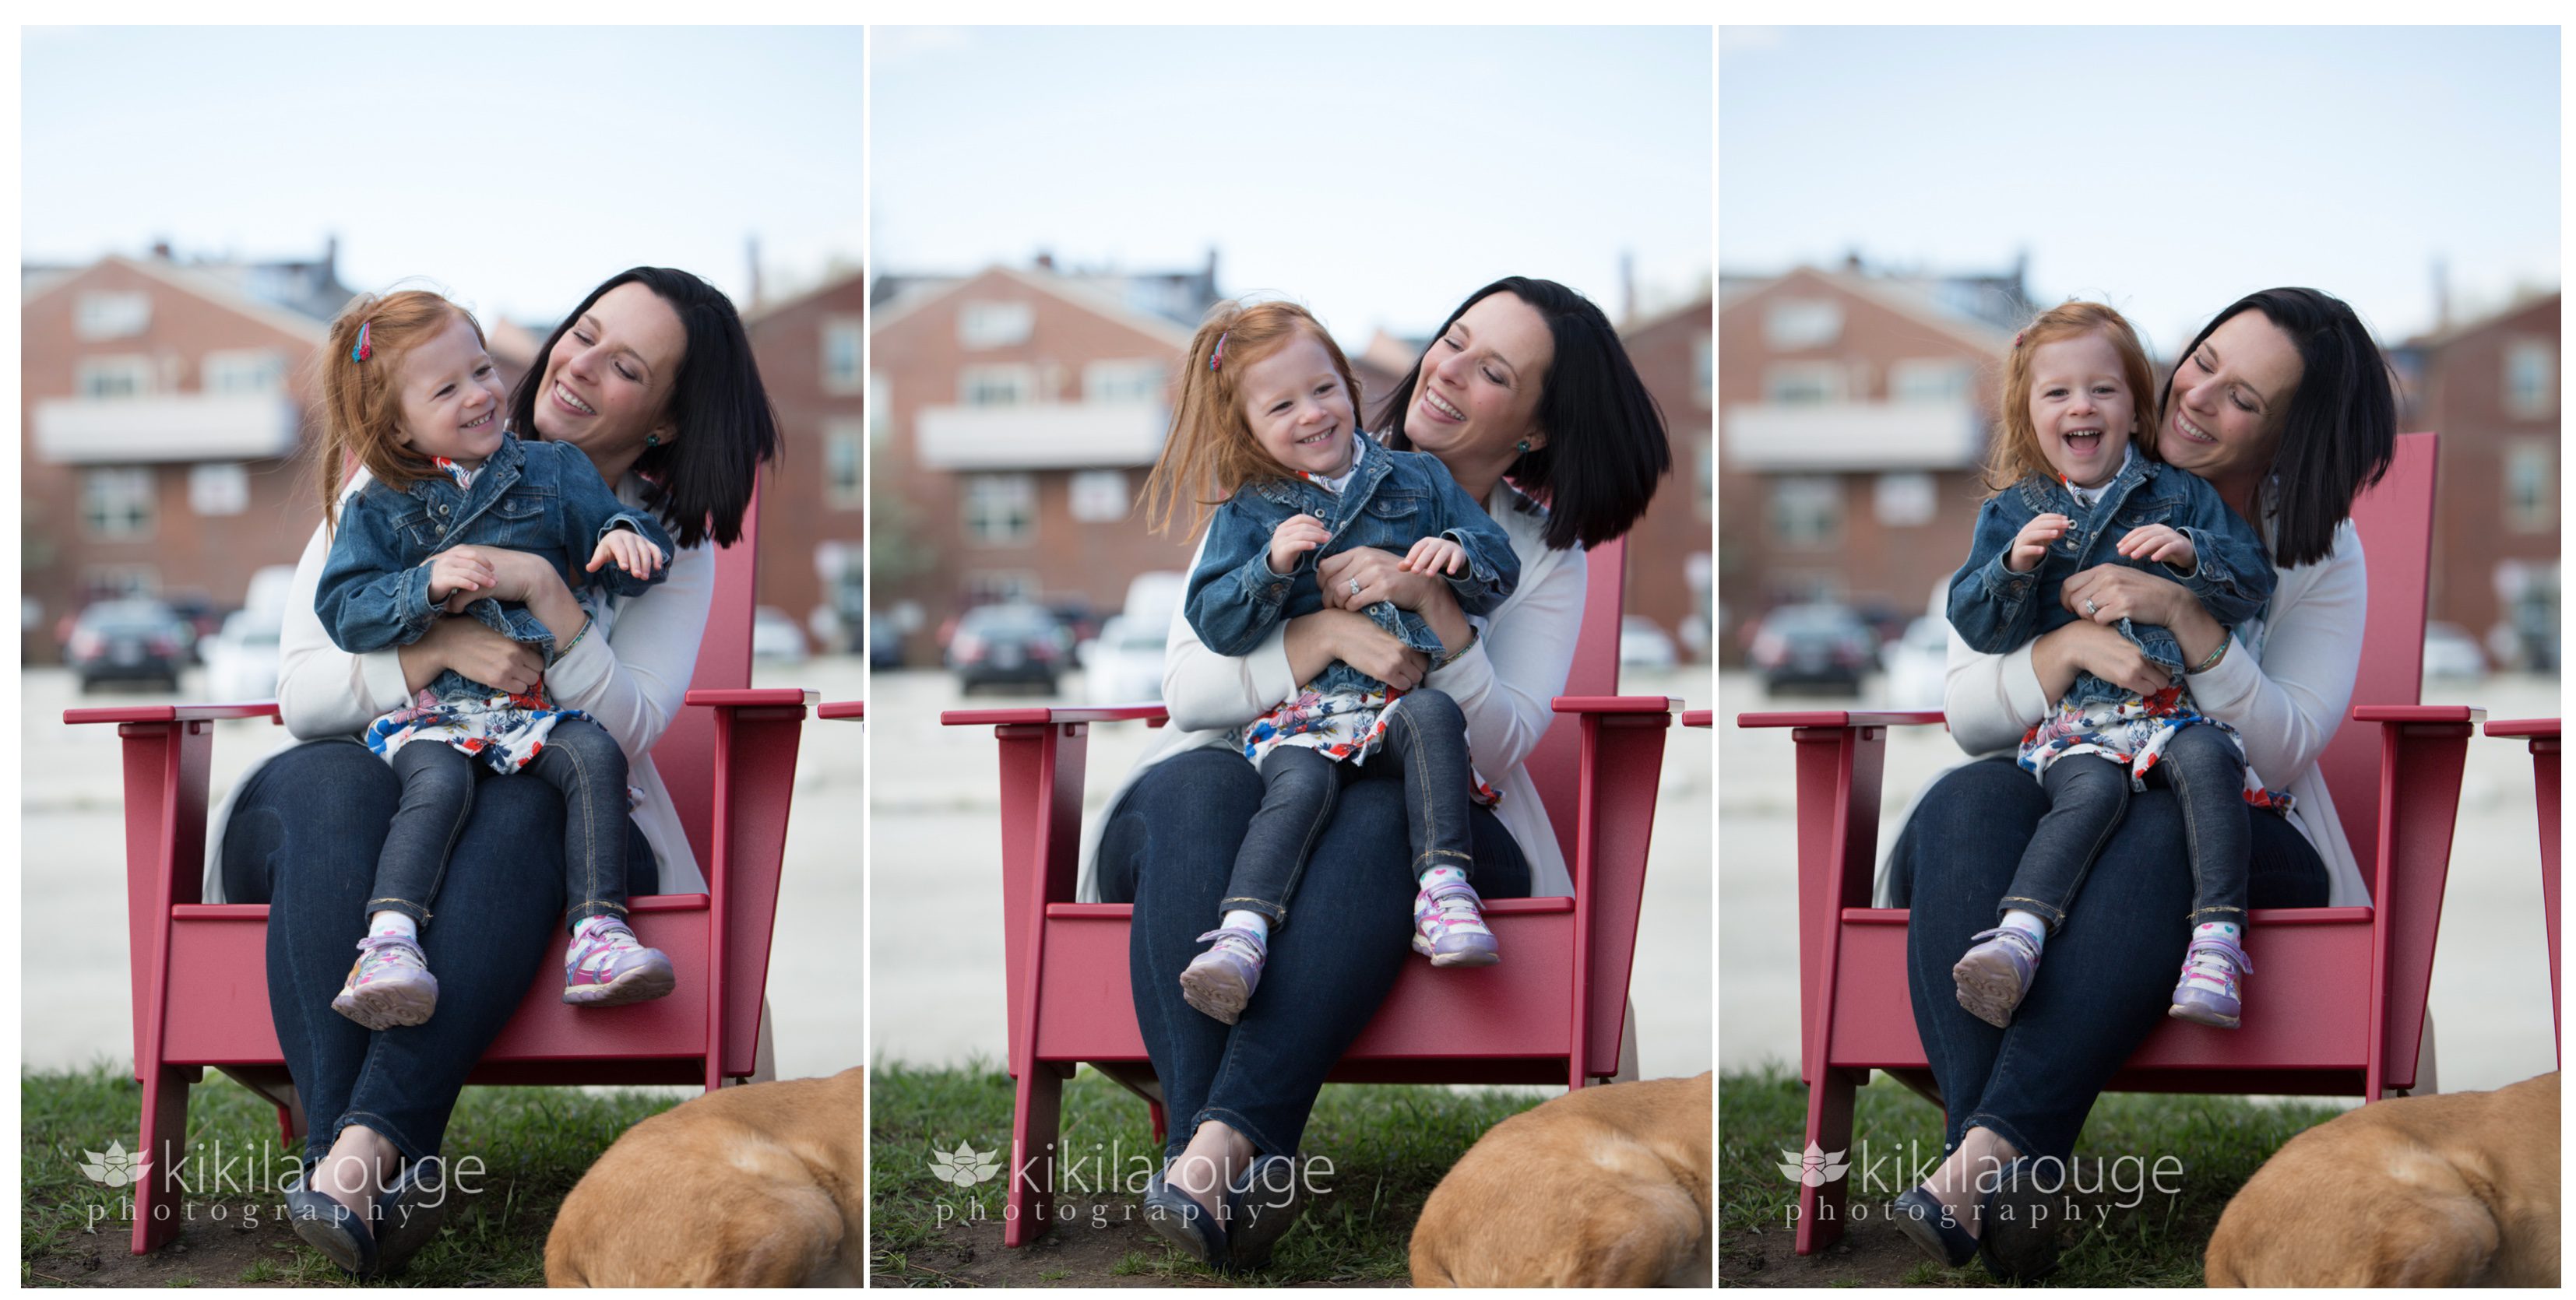 Triptych of Mom and her daughter laughing